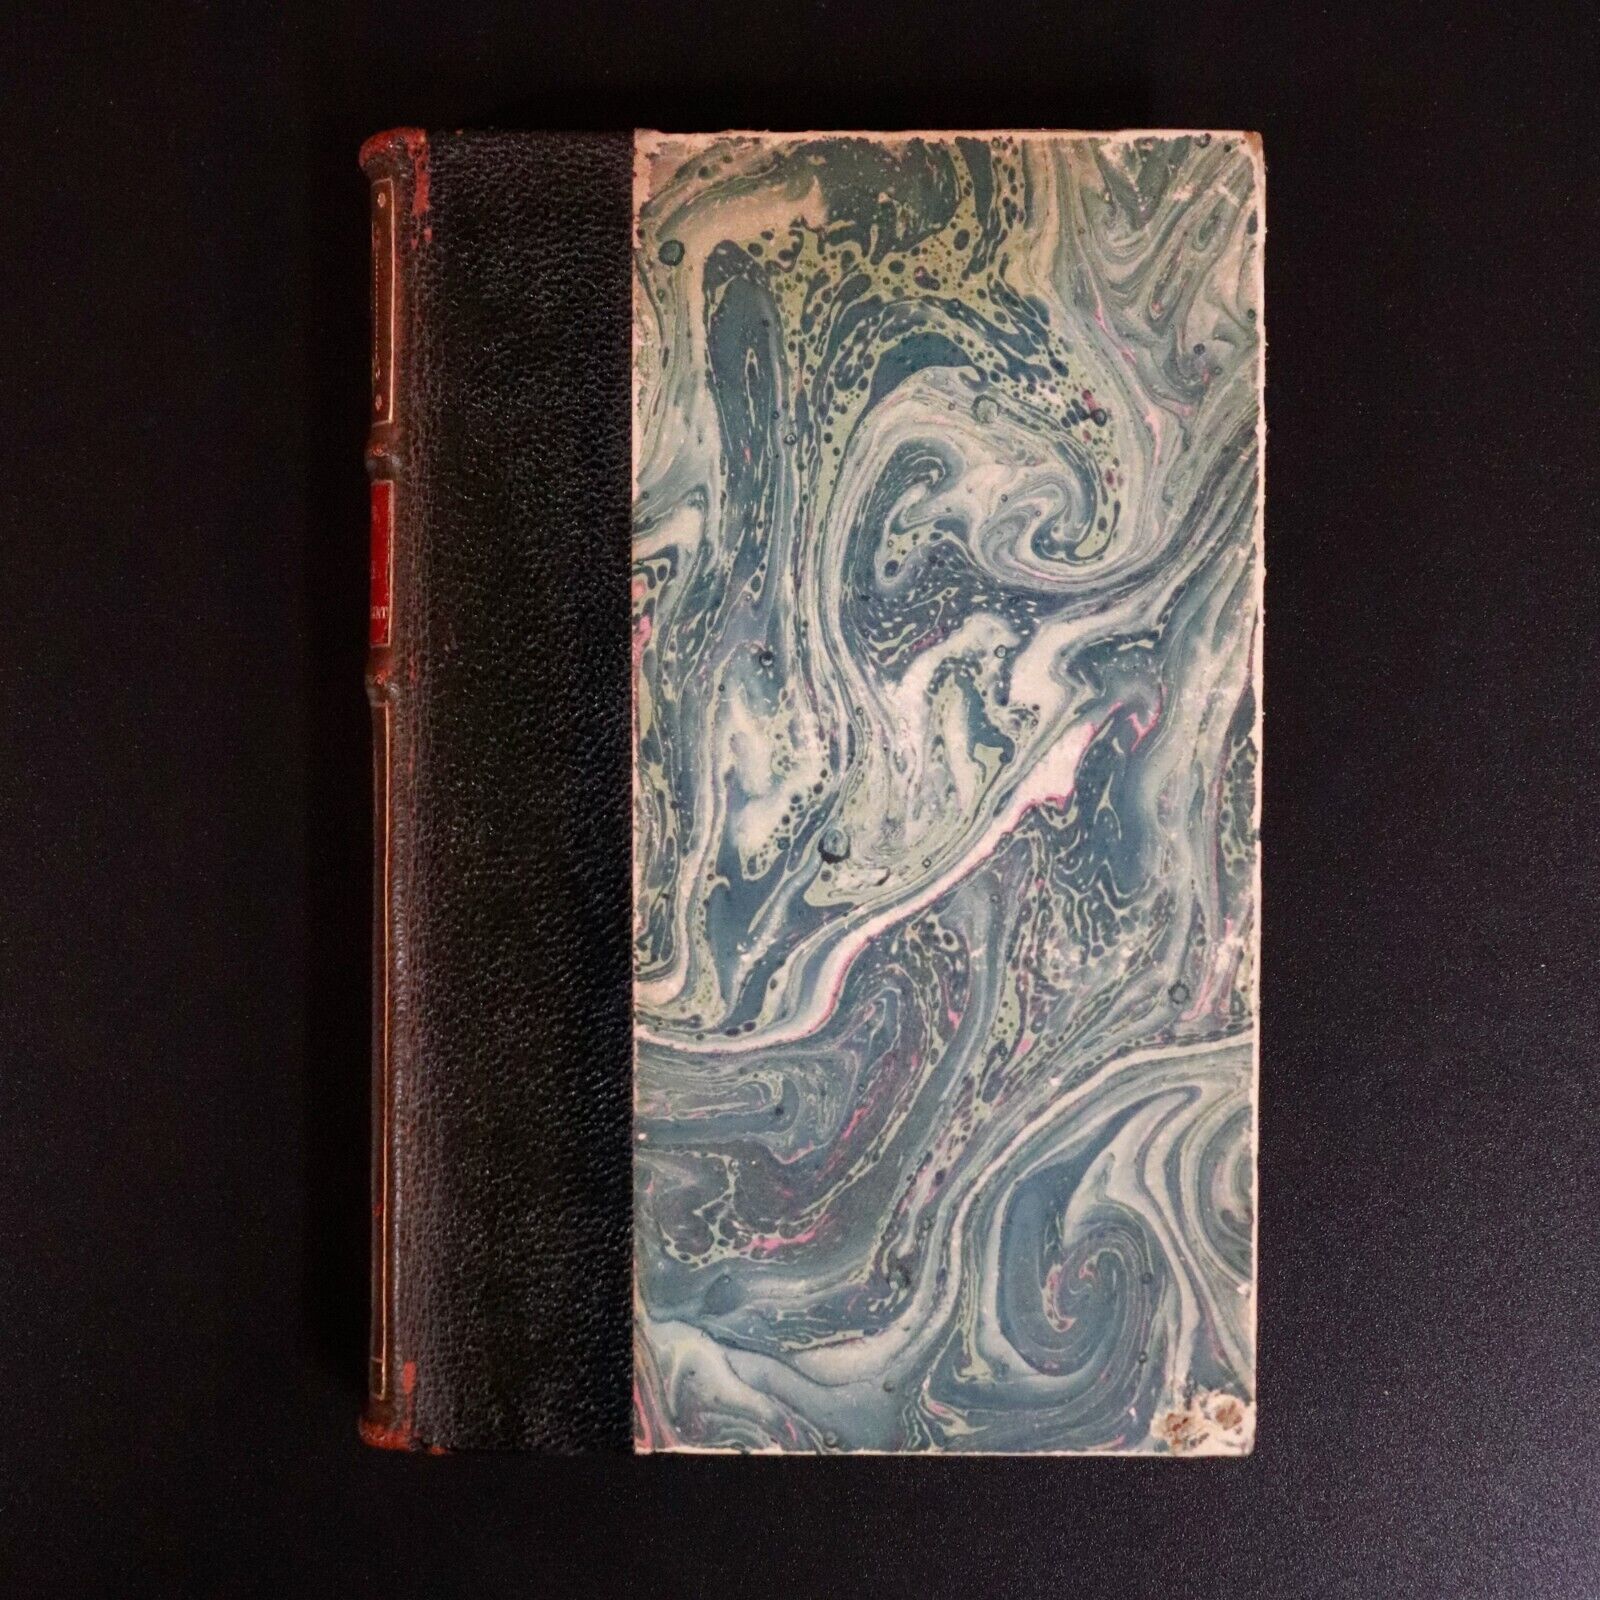 1923 Madame Mere Du Regent by Arvede Barine French History Book Fine Binding